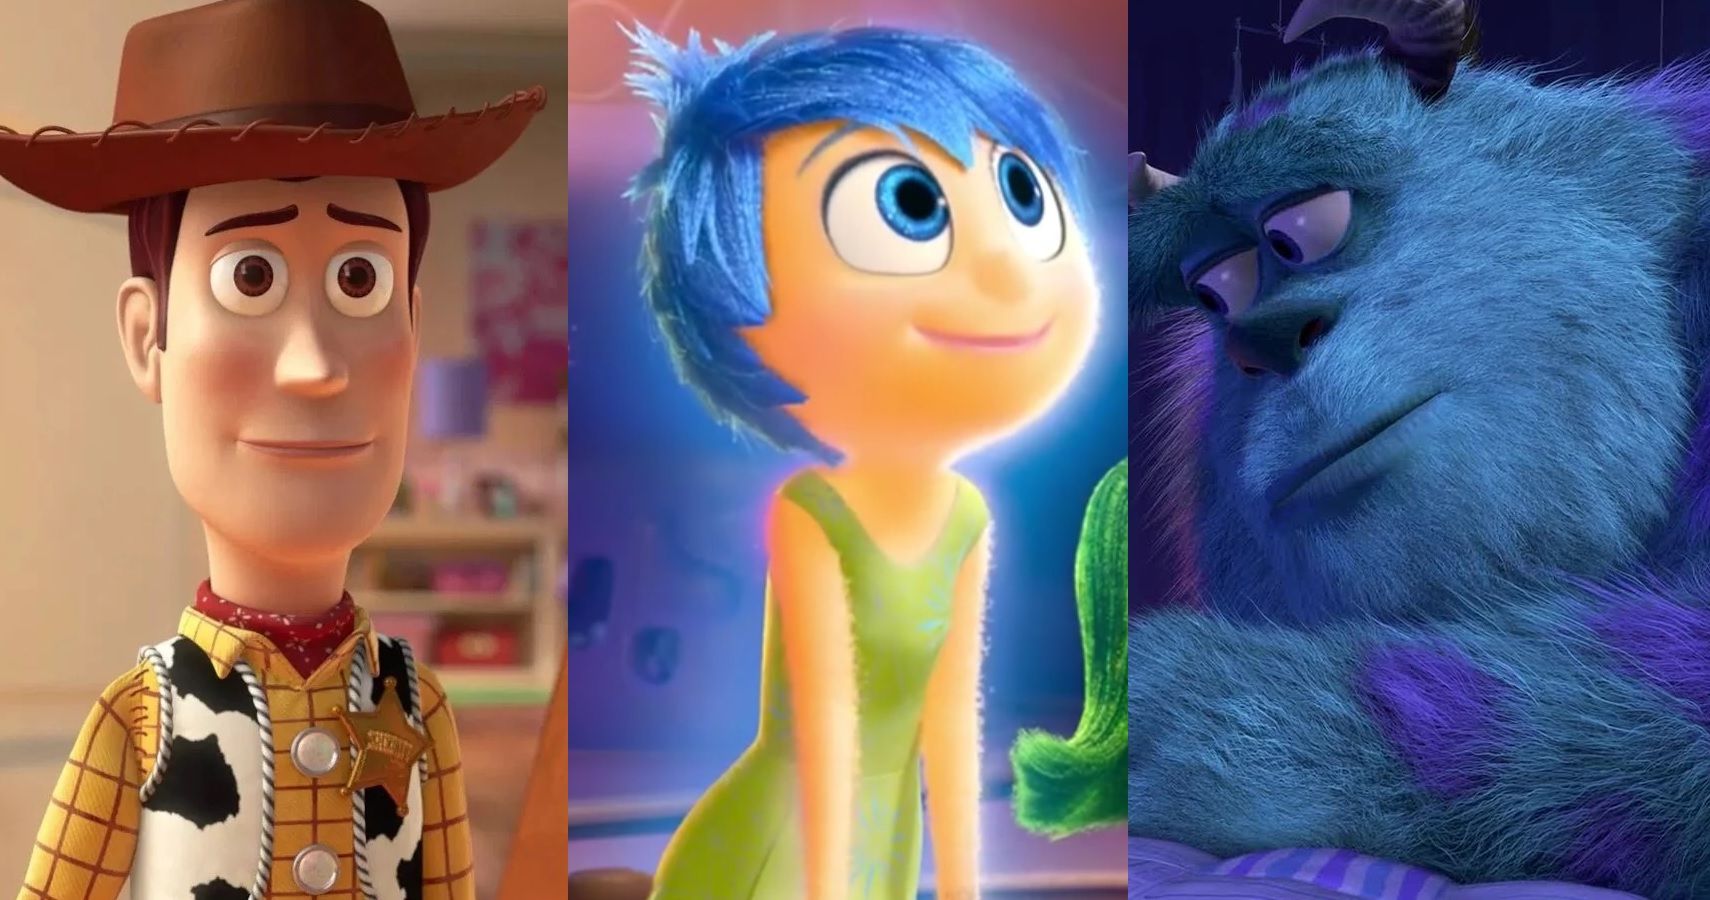 10 Pixar Characters that Would Make a Good President